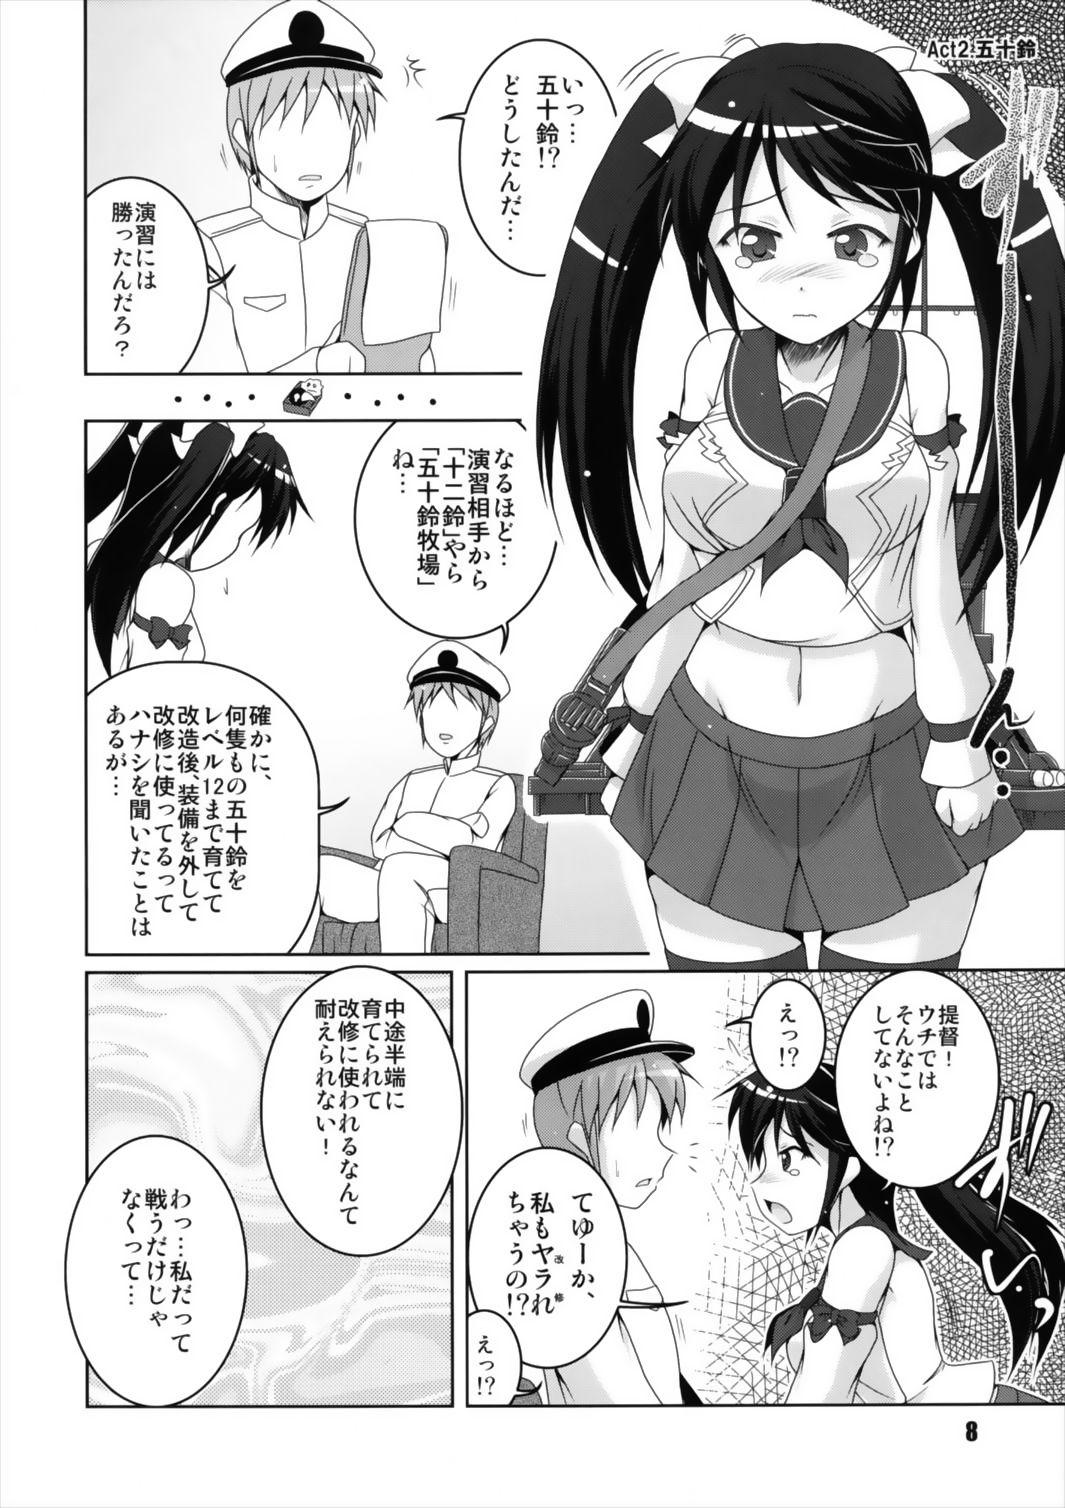 Staxxx Nagaina Collection - Kantai collection Two - Page 8